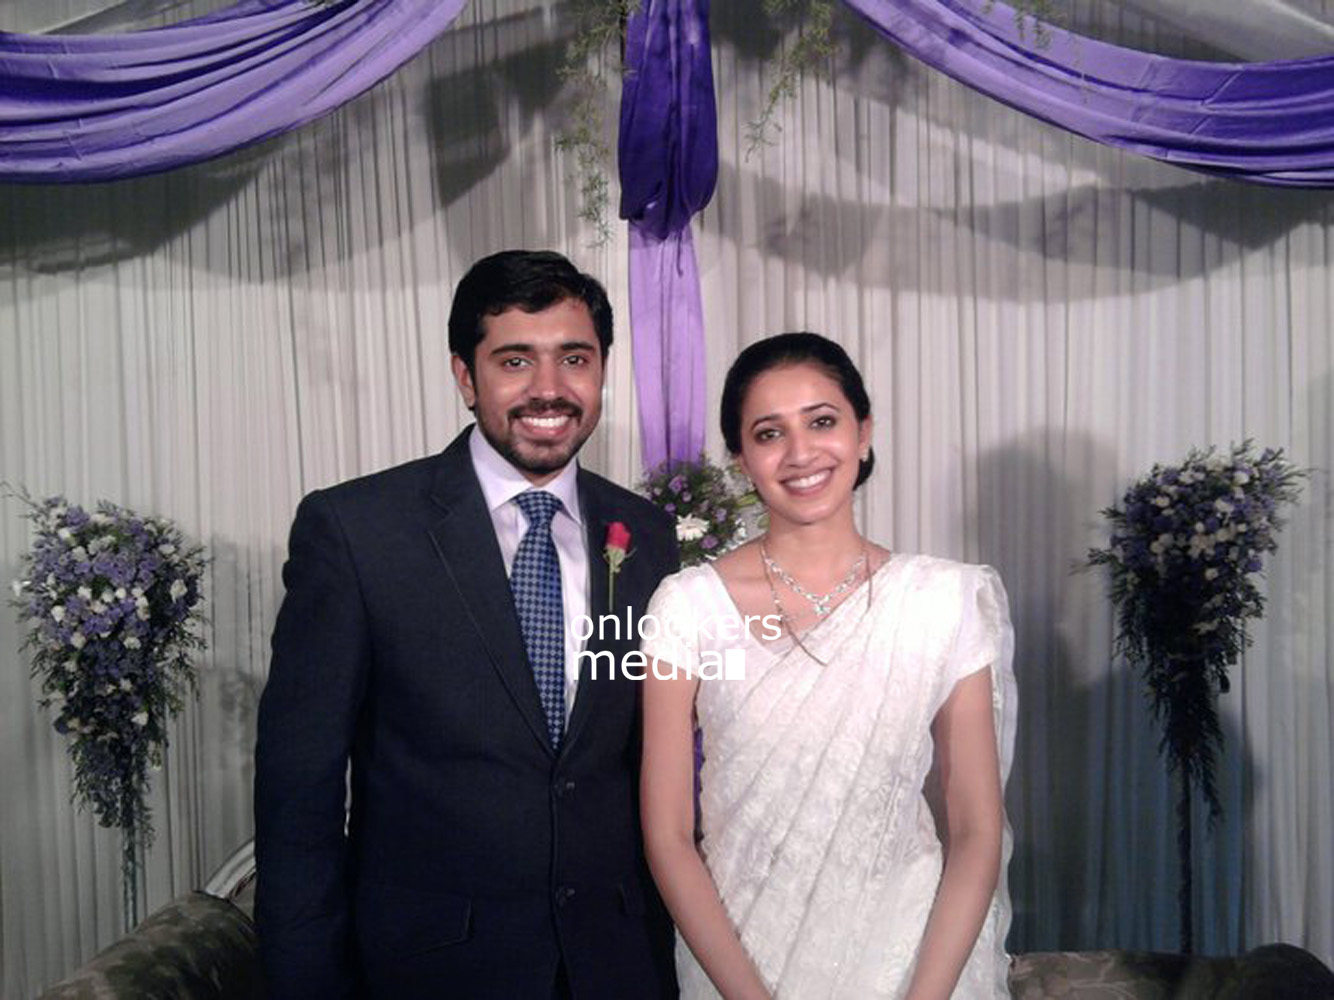 https://onlookersmedia.in/wp-content/uploads/2015/06/Nivin-Pauly-with-wife-Rinna-Joy-Nivin-Pauly-Family-Rare-Unseen-Stills-Images-Photos-Onlookers-Media-2.jpg